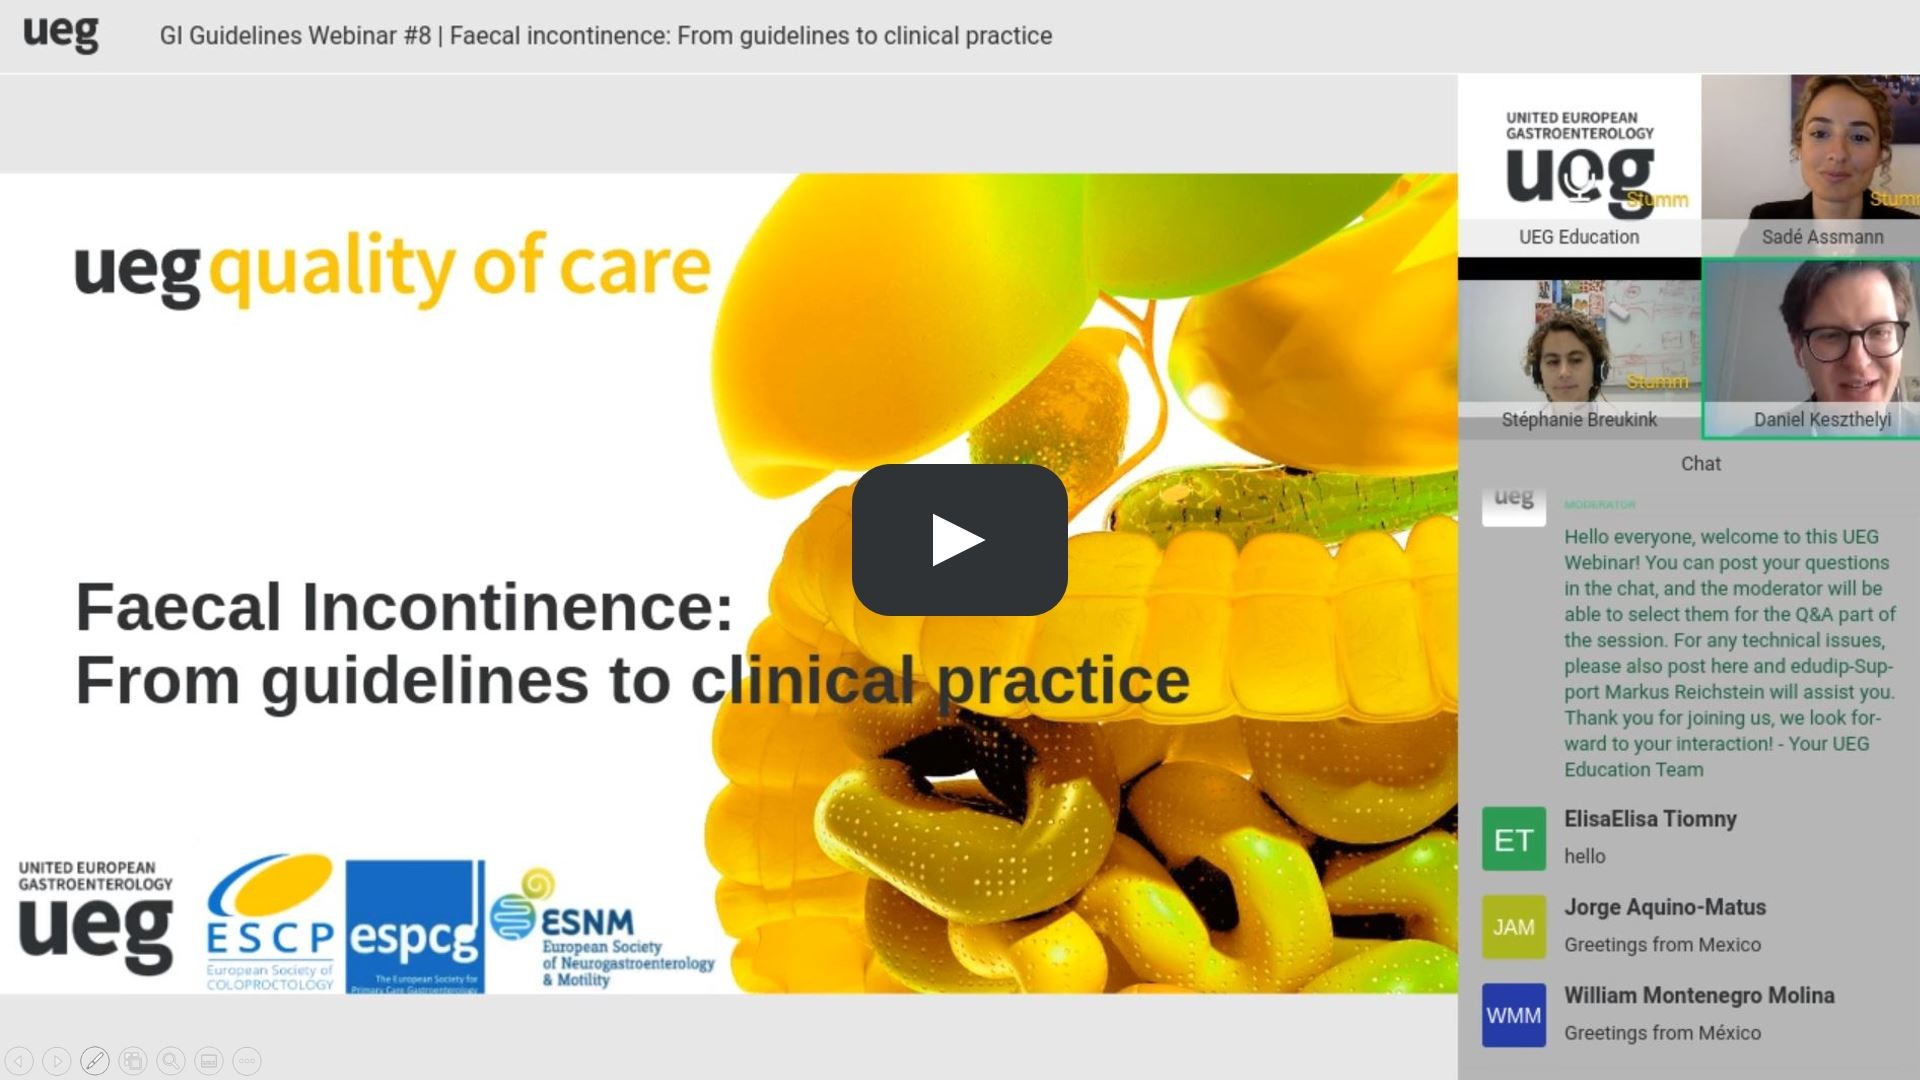 Faecal incontinence: From guidelines to clinical practice